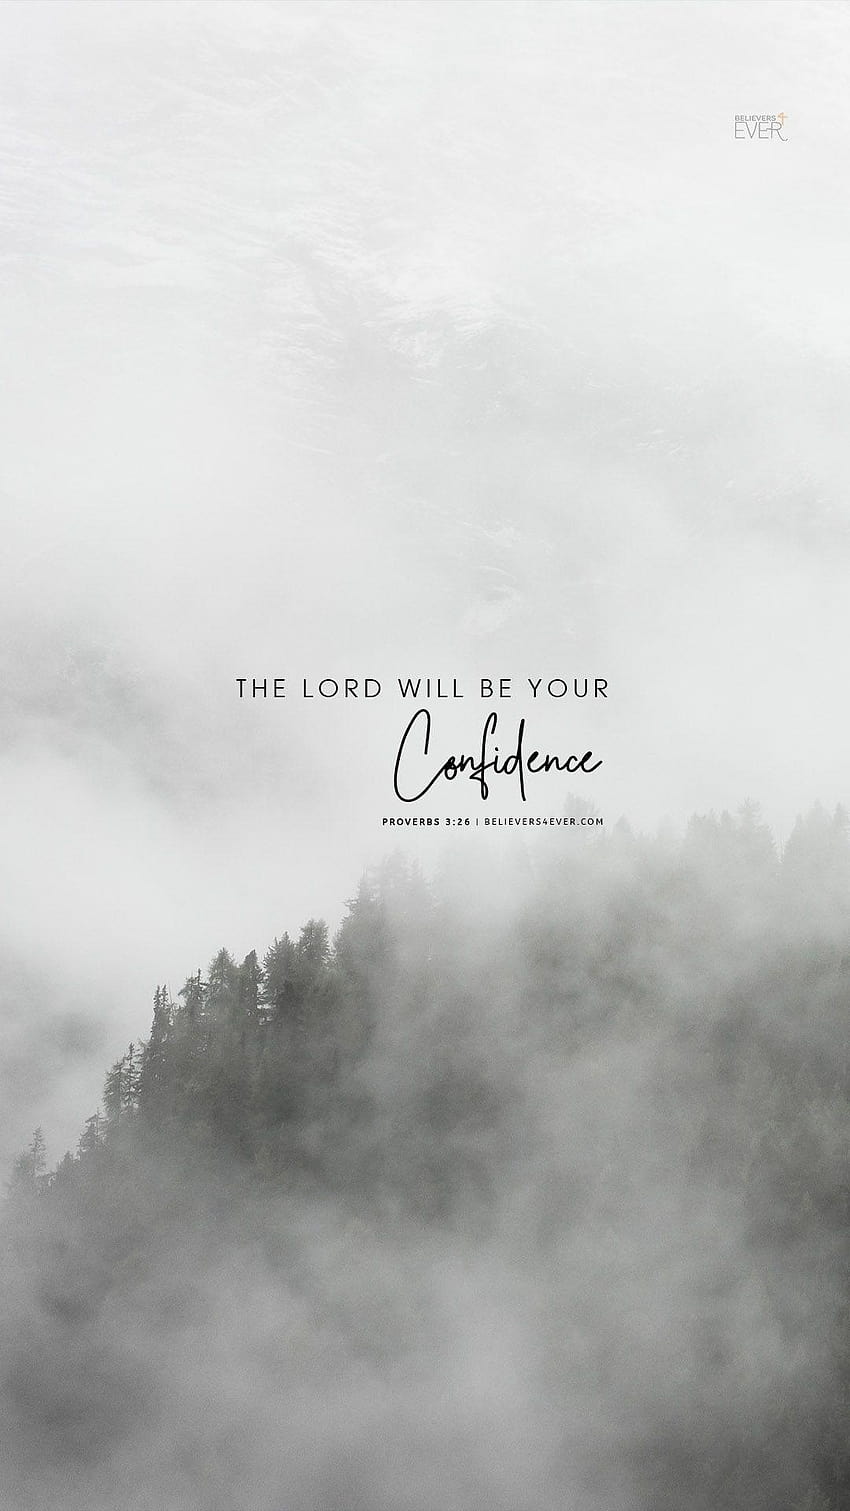 The Lord will be your confidence, bible verse android HD phone wallpaper